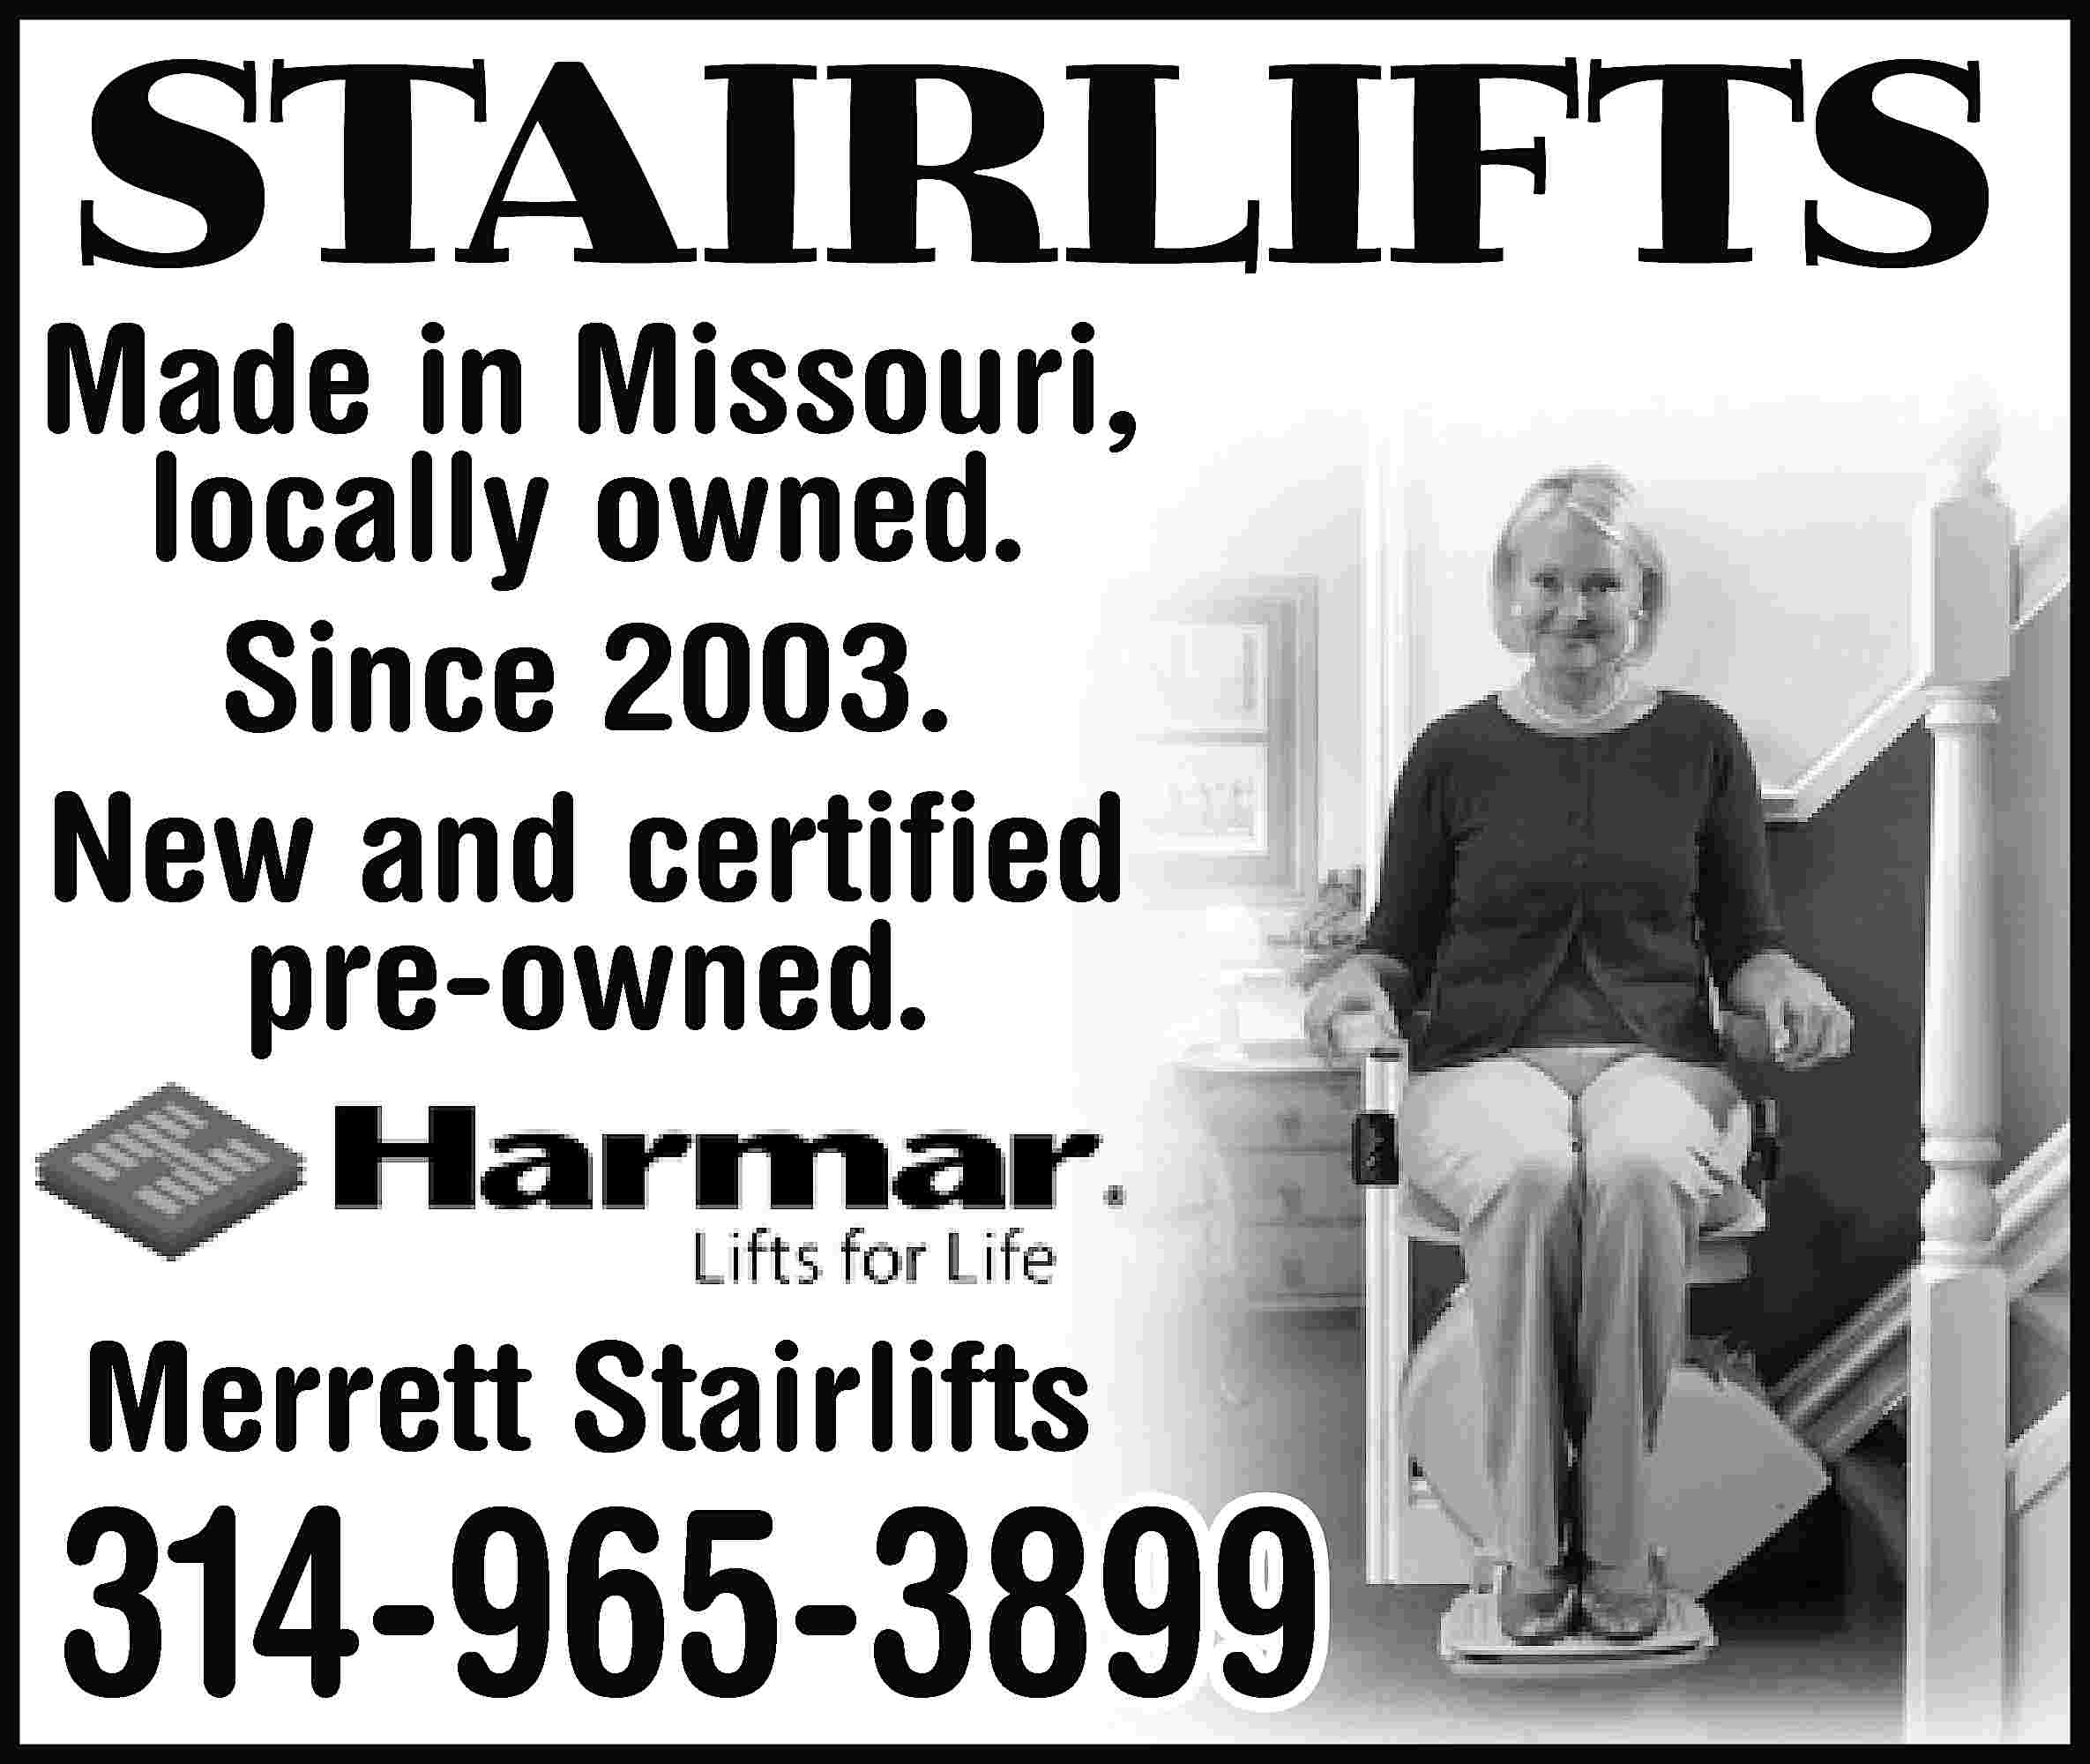 STAIRLIFTS Made in Missouri, locally  STAIRLIFTS Made in Missouri, locally owned. Since 2003. New and certified pre-owned. Merrett Stairlifts 314-965-3899